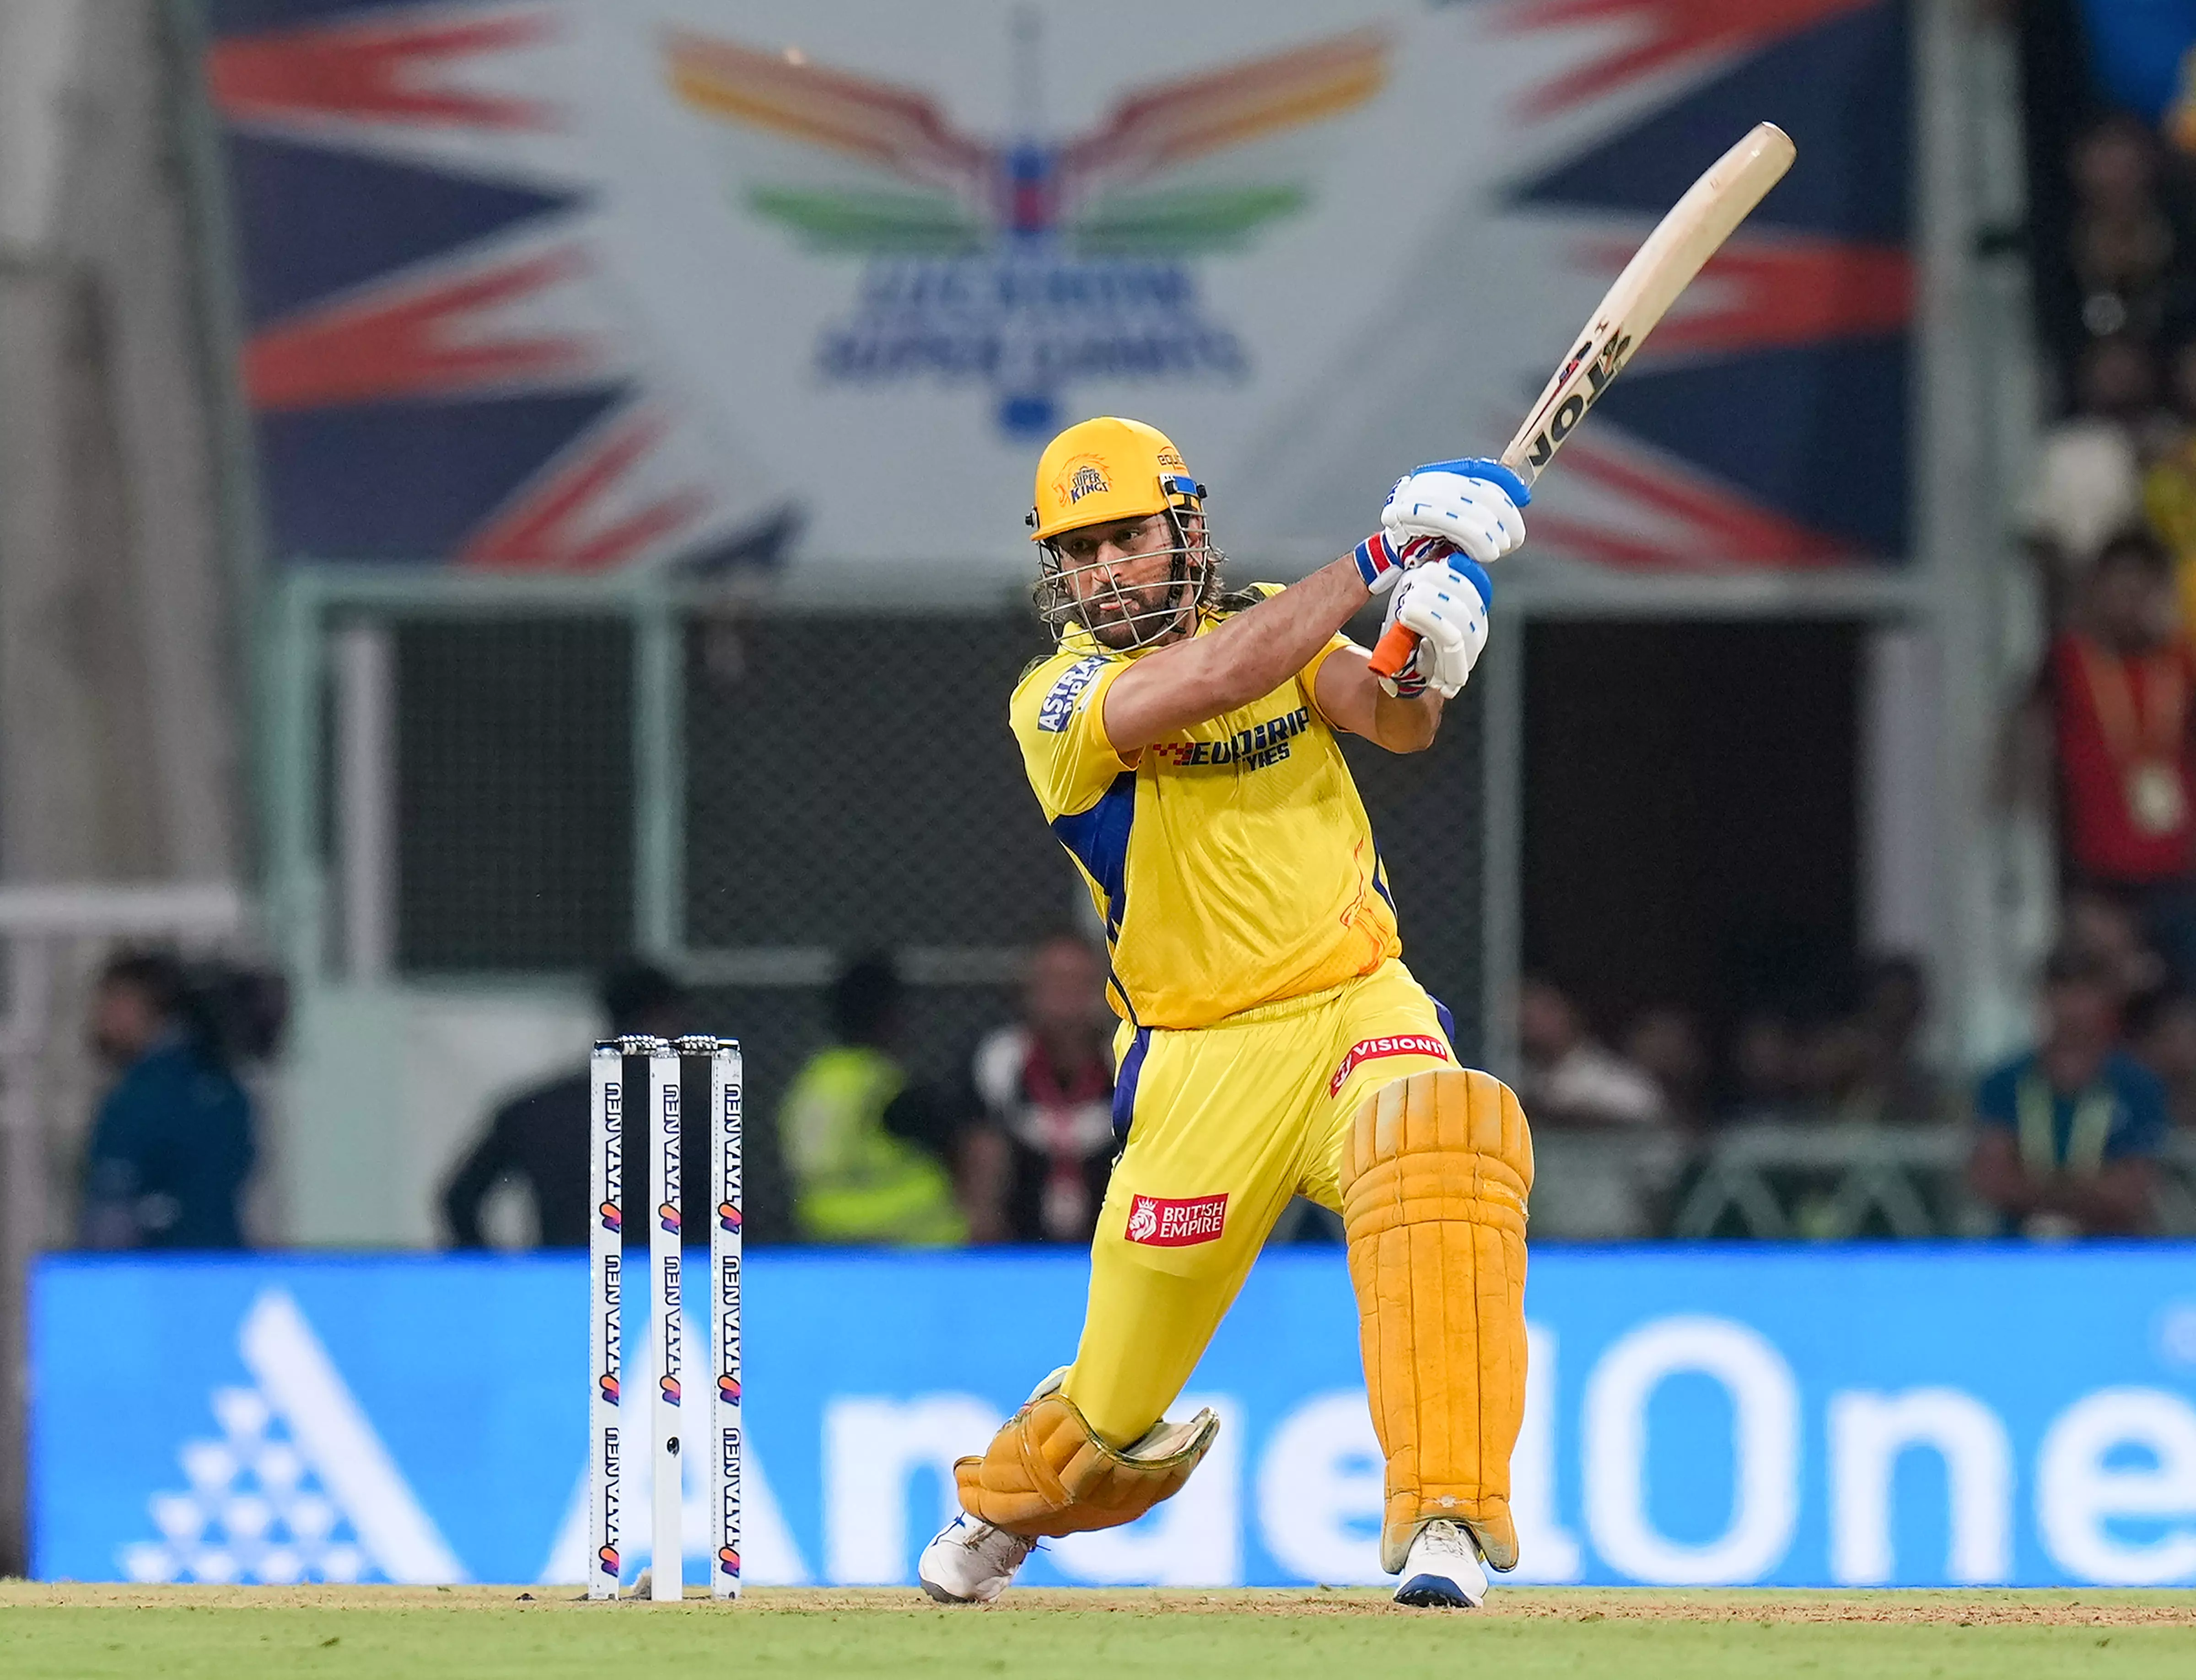 MS Dhoni in action during the Indian Premier League (IPL) match between Chennai Super Kings and Lucknow Super Giants at Ekana Cricket Stadium, in Lucknow, on Friday. PTI Photo